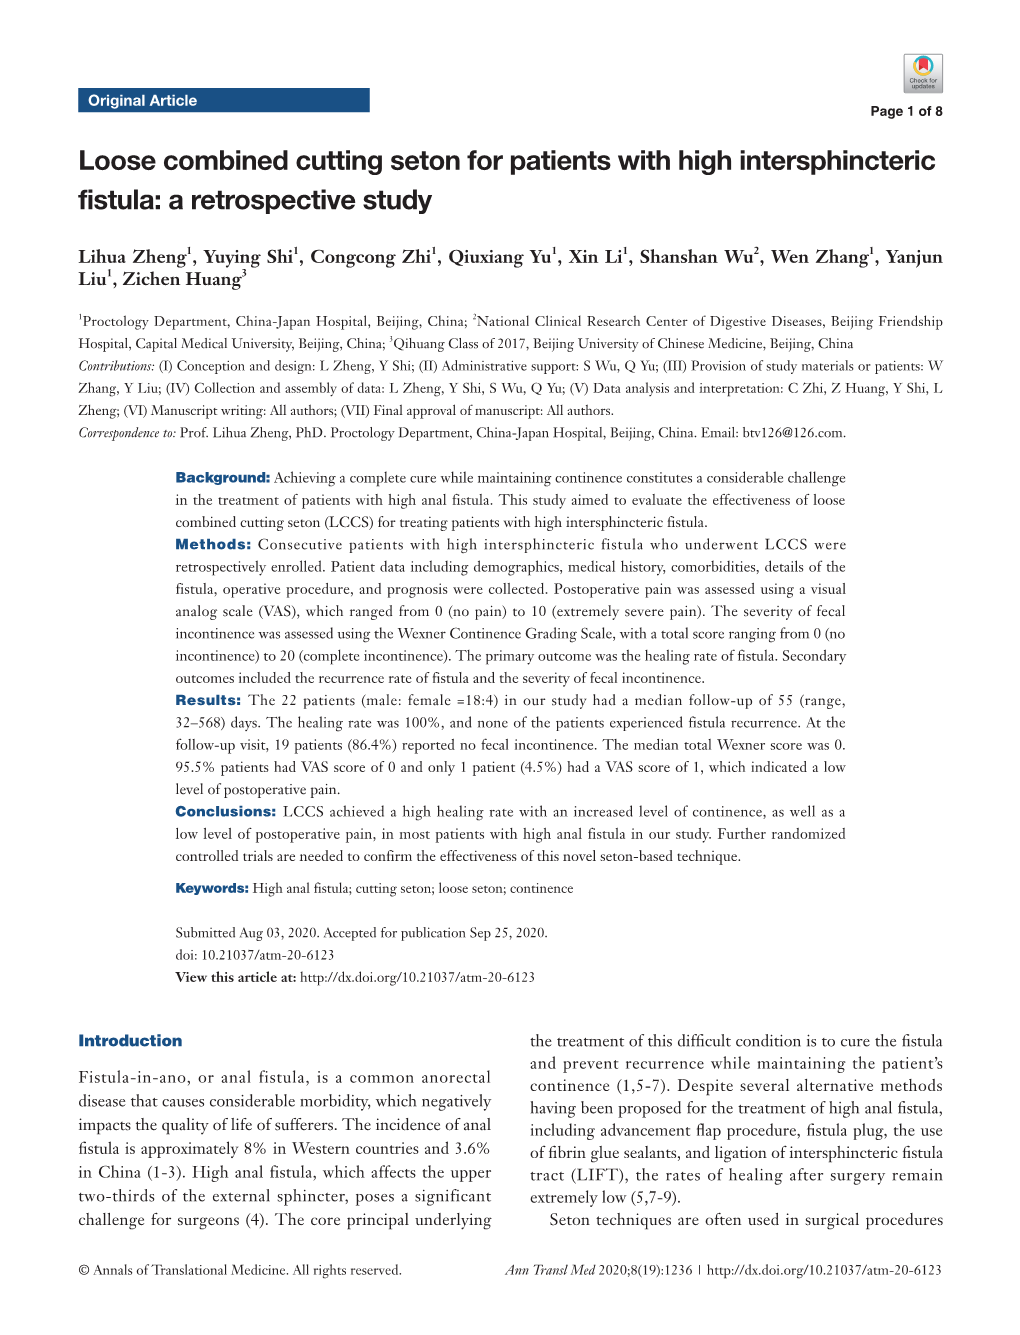 Loose Combined Cutting Seton for Patients with High Intersphincteric Fistula: a Retrospective Study